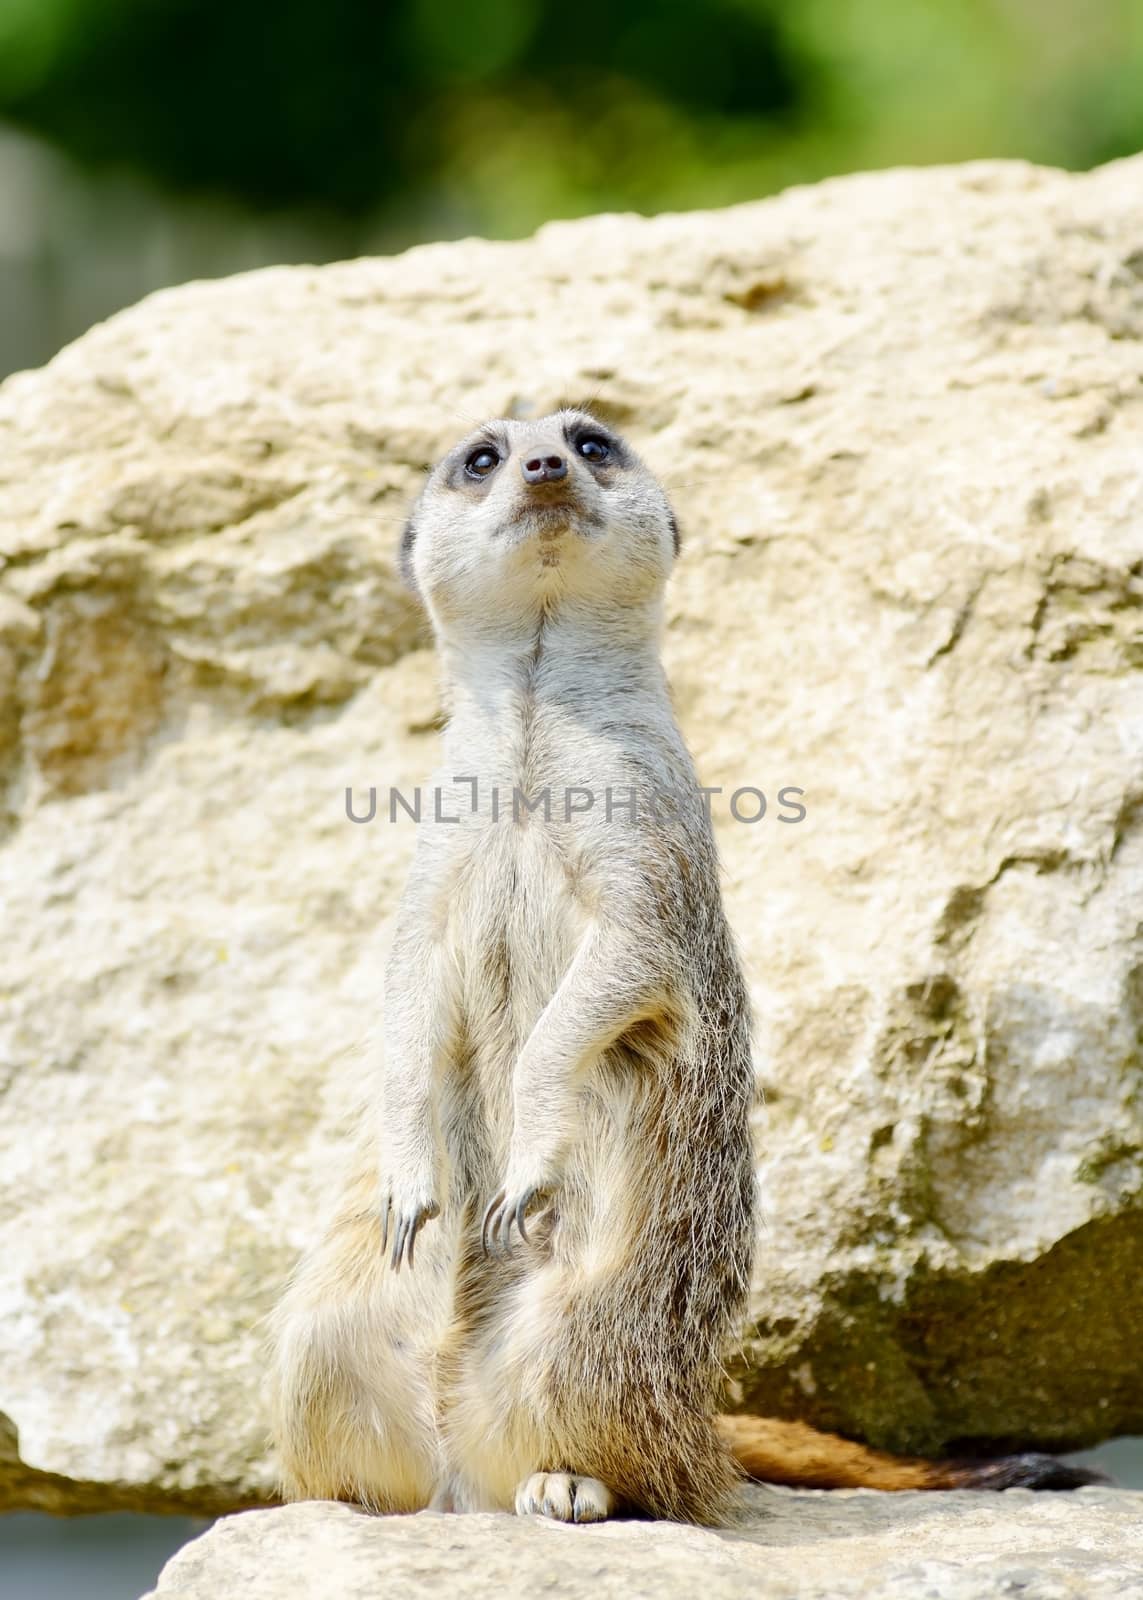 Meercat alert by kmwphotography